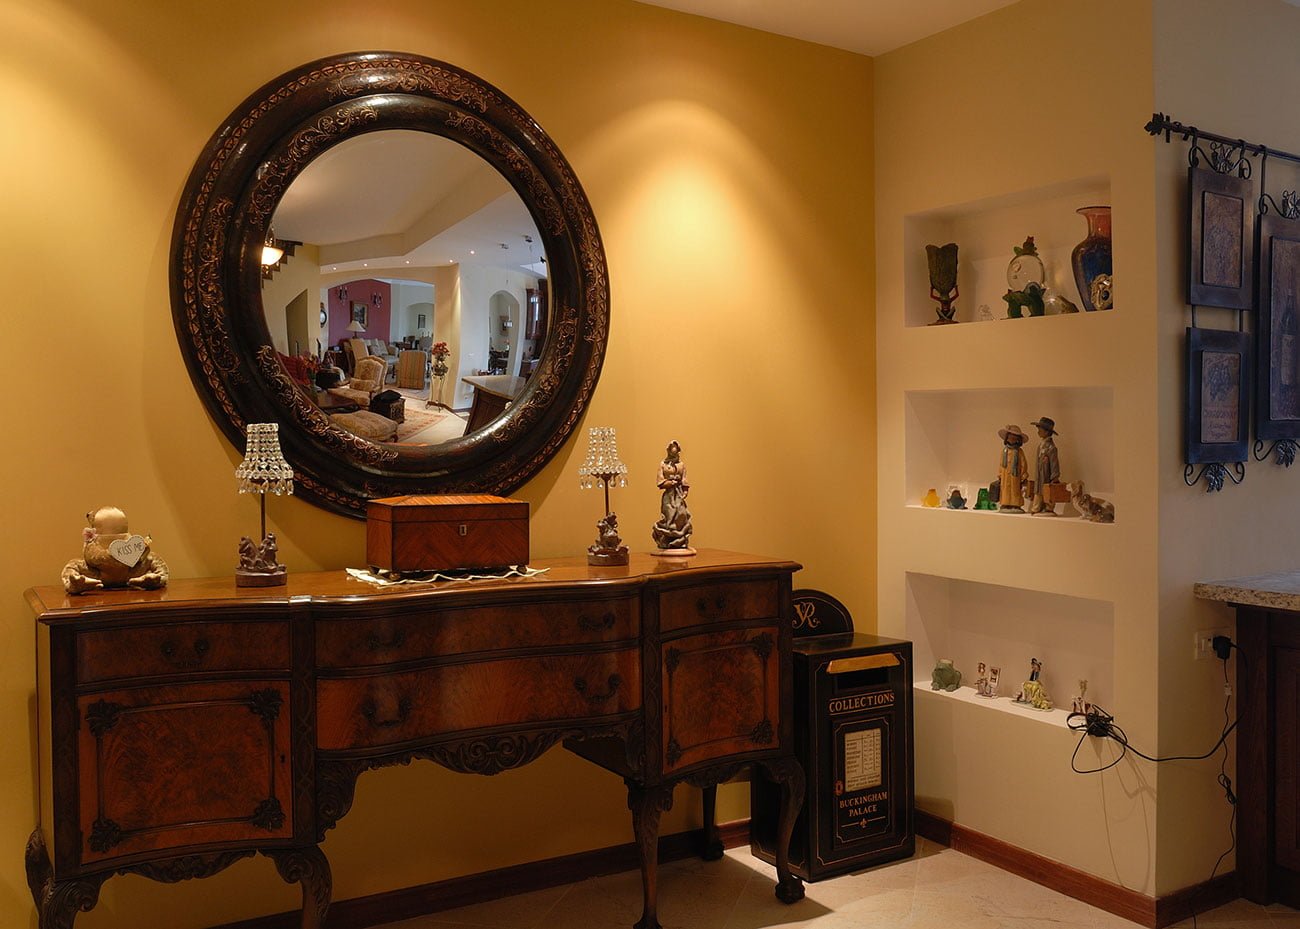 photo of the interior of the hallway with an antique chest of drawers and a mirror in a classic style